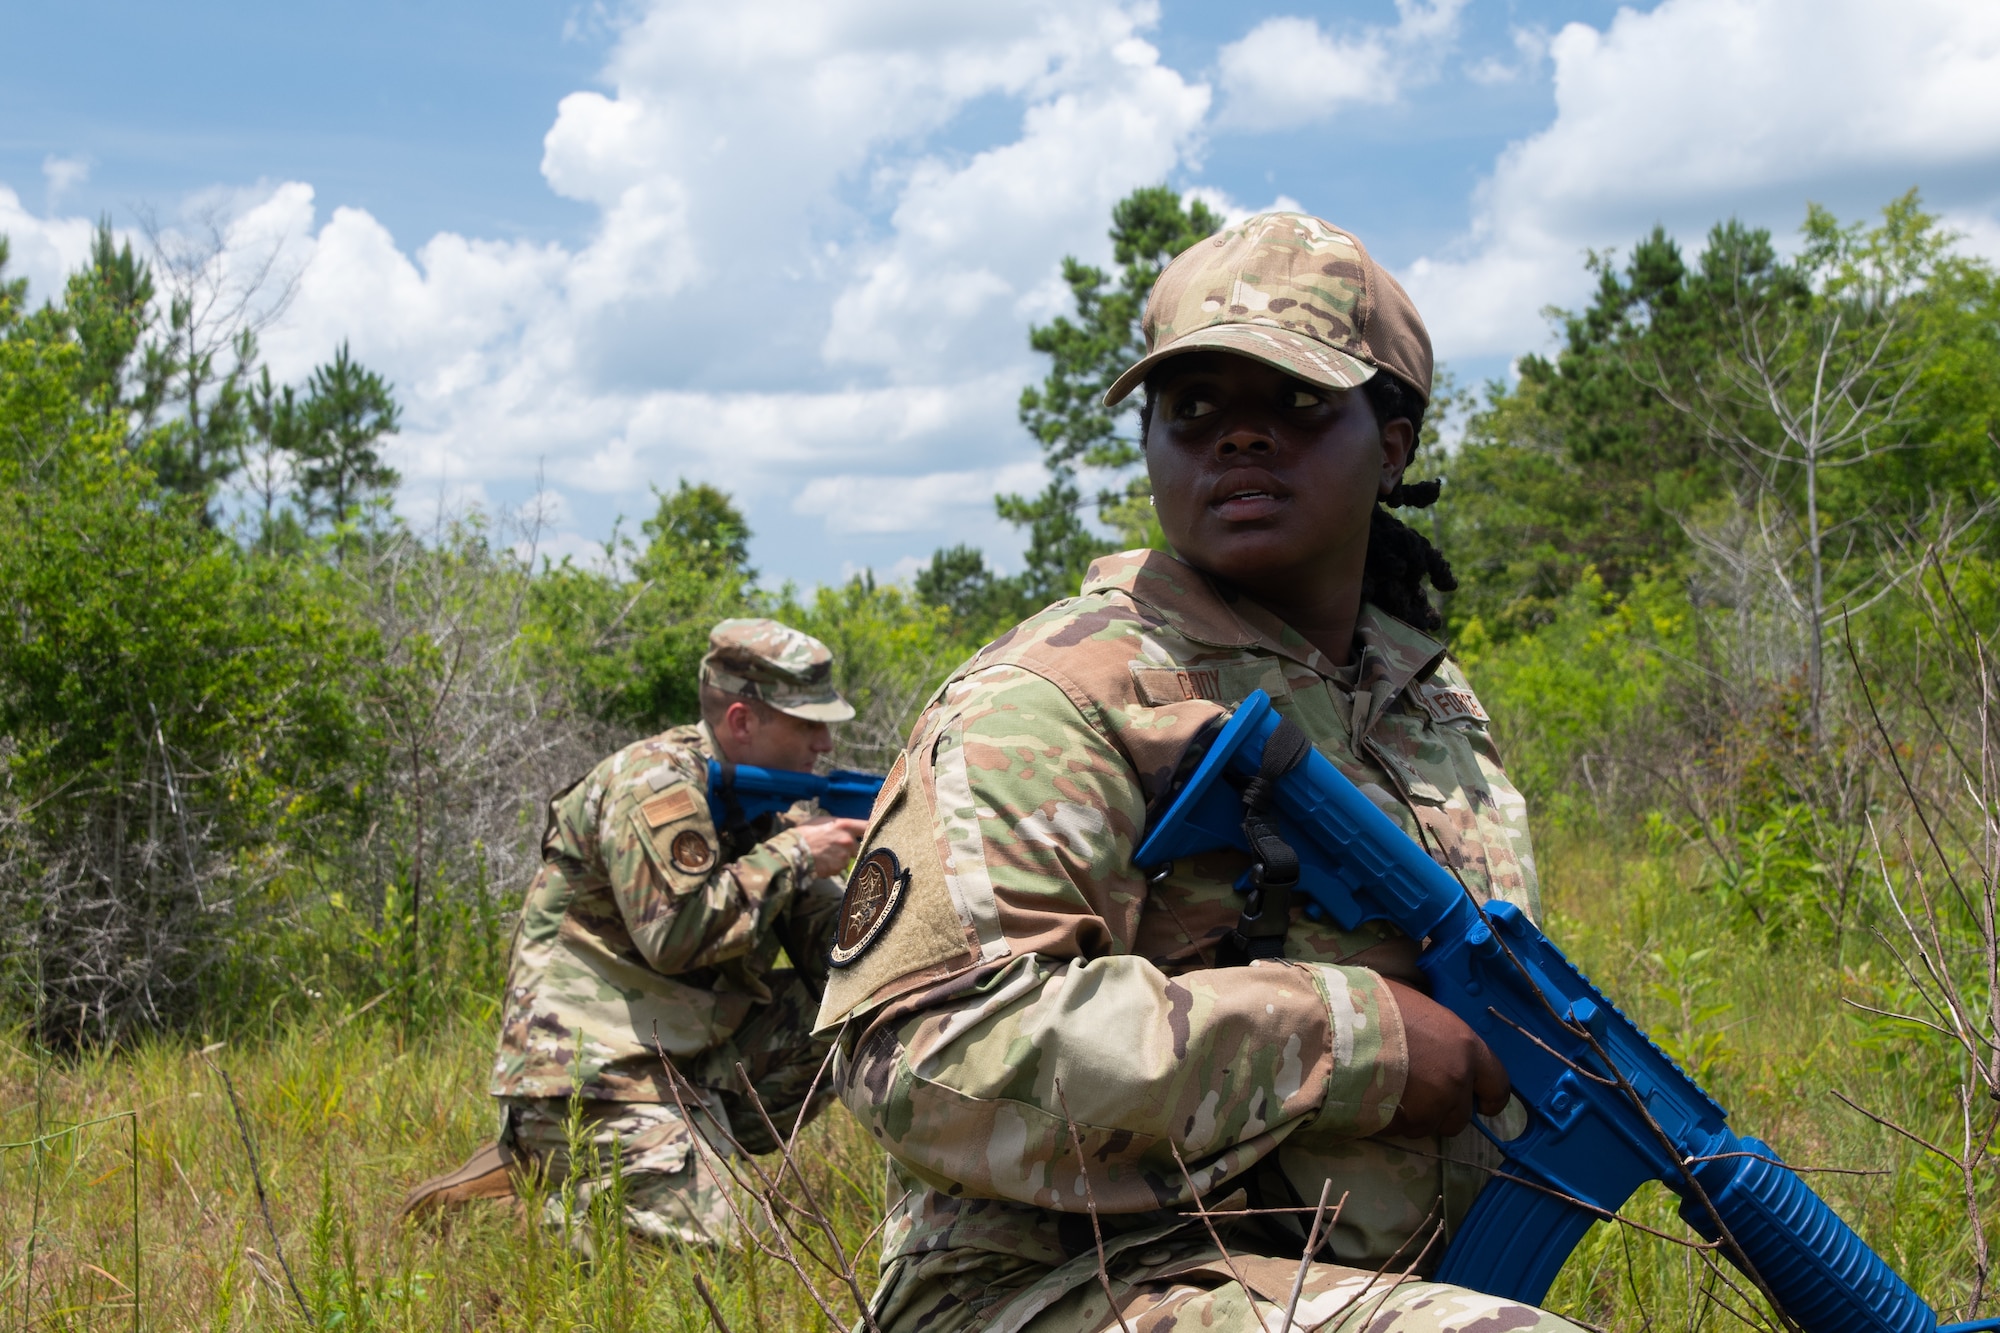 Members from the 221st and 239th Combat Communications Squadrons practice suppressive fire techniques as part of Tactical Combat Casualty Care maneuvers during Exercise BUMBU 22 at Camp Shelby, Miss., June 5, 2022. BUMBU 22 brings five combat communications squadrons with the 254th Combat Communications Group from their home stations located across the nation together for a consolidated training exercise. (Air National Guard photo by Staff Sgt. Adrian Brakeley)